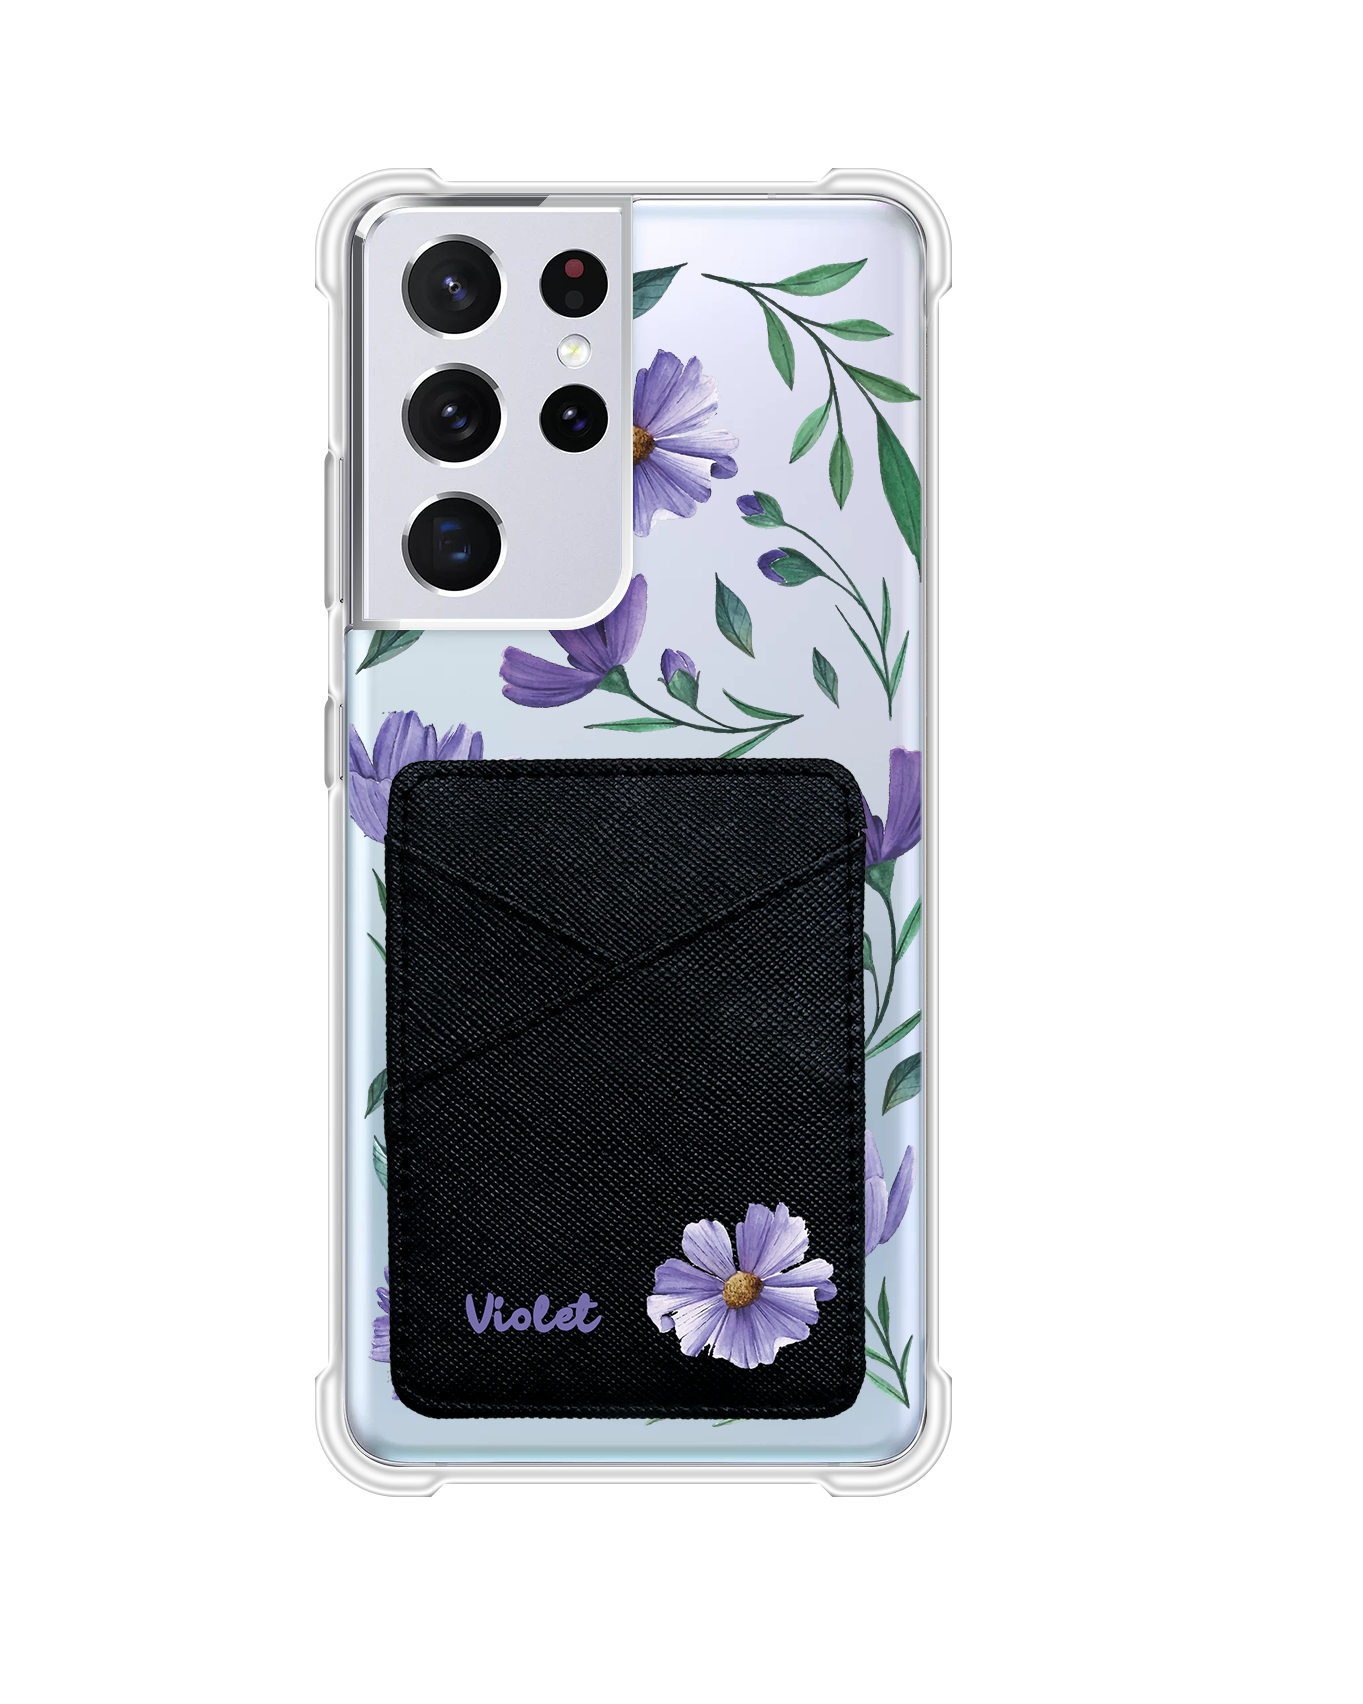 Android Phone Wallet Case - February Violets 1.0